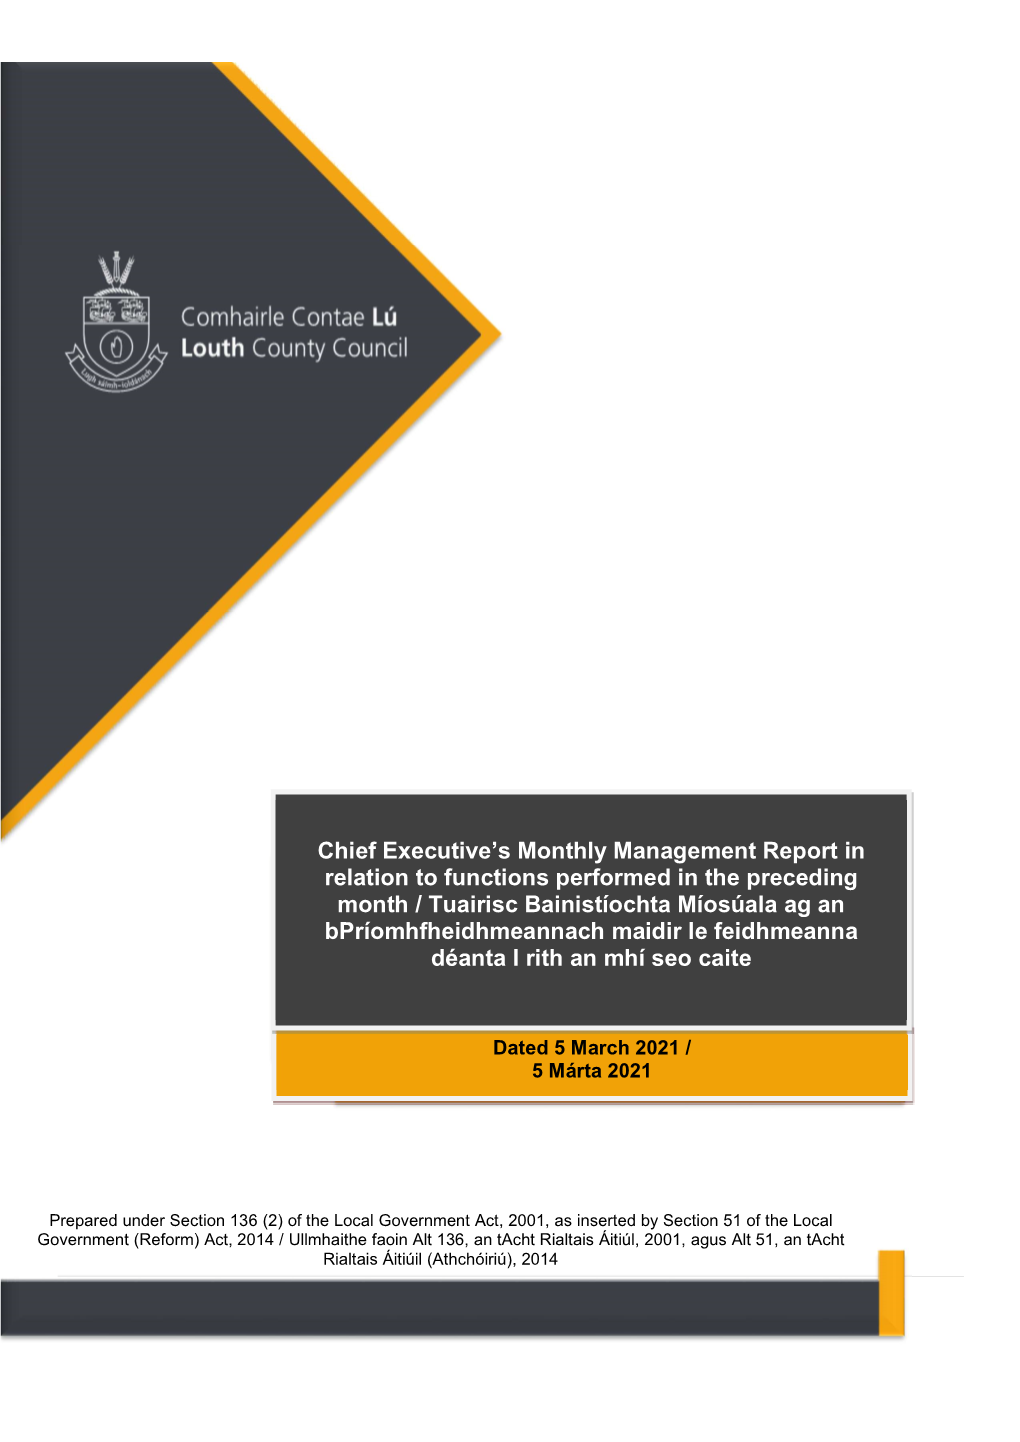 Chief Executive's Monthly Management Report in Relation To